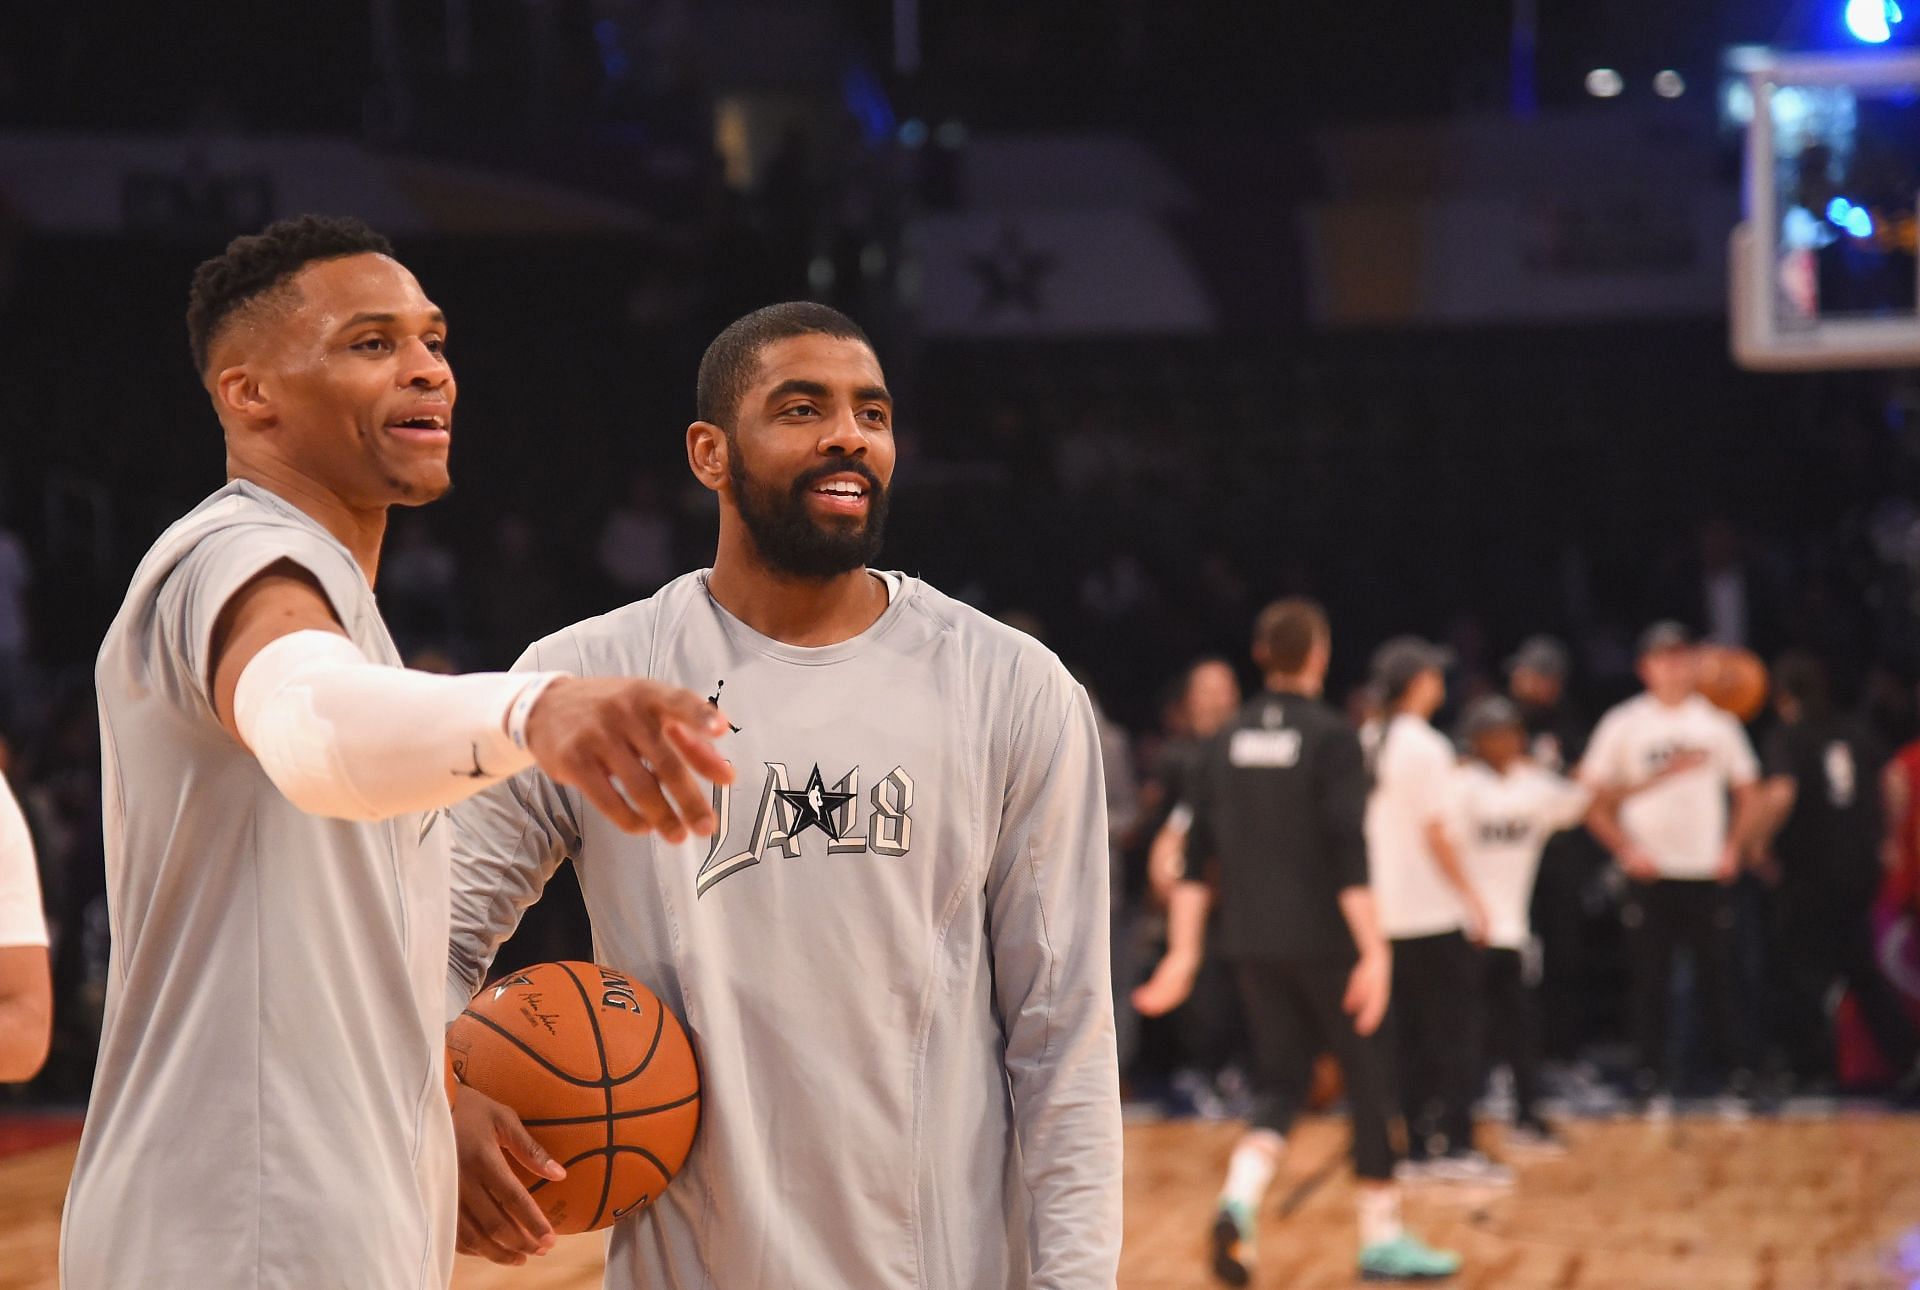 Russell Westbrook and Kyrie Irving warm up during the 2018 NBA All-Star Game